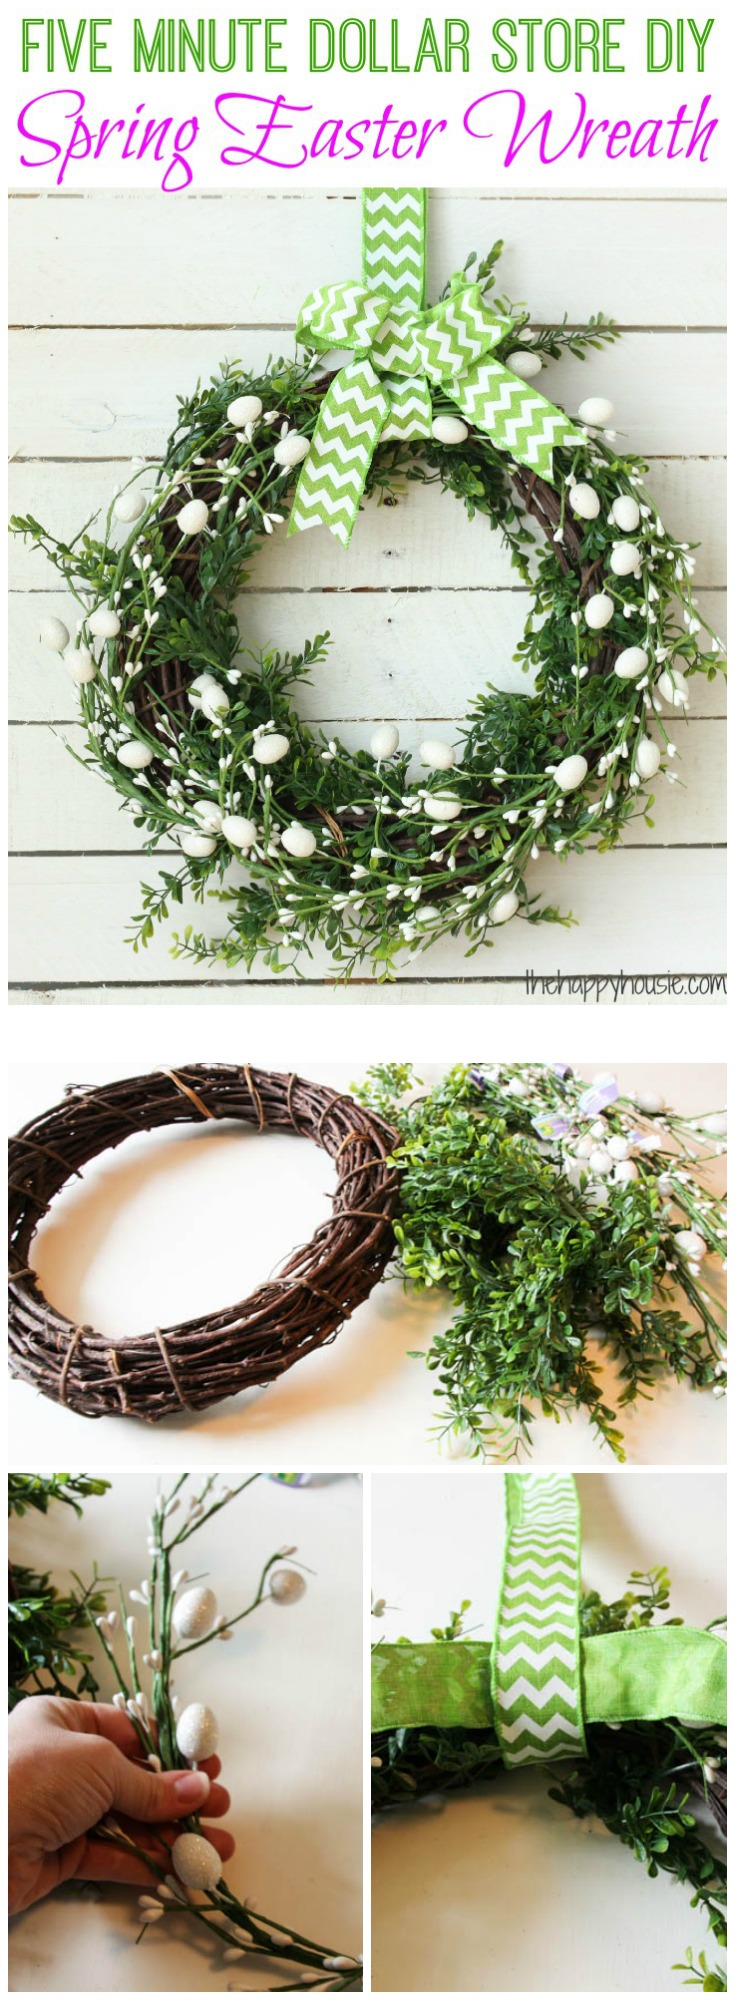 How to make your own Five Minute Dollar Store DIY Spring Easter Wreath at thehappyhousie.com